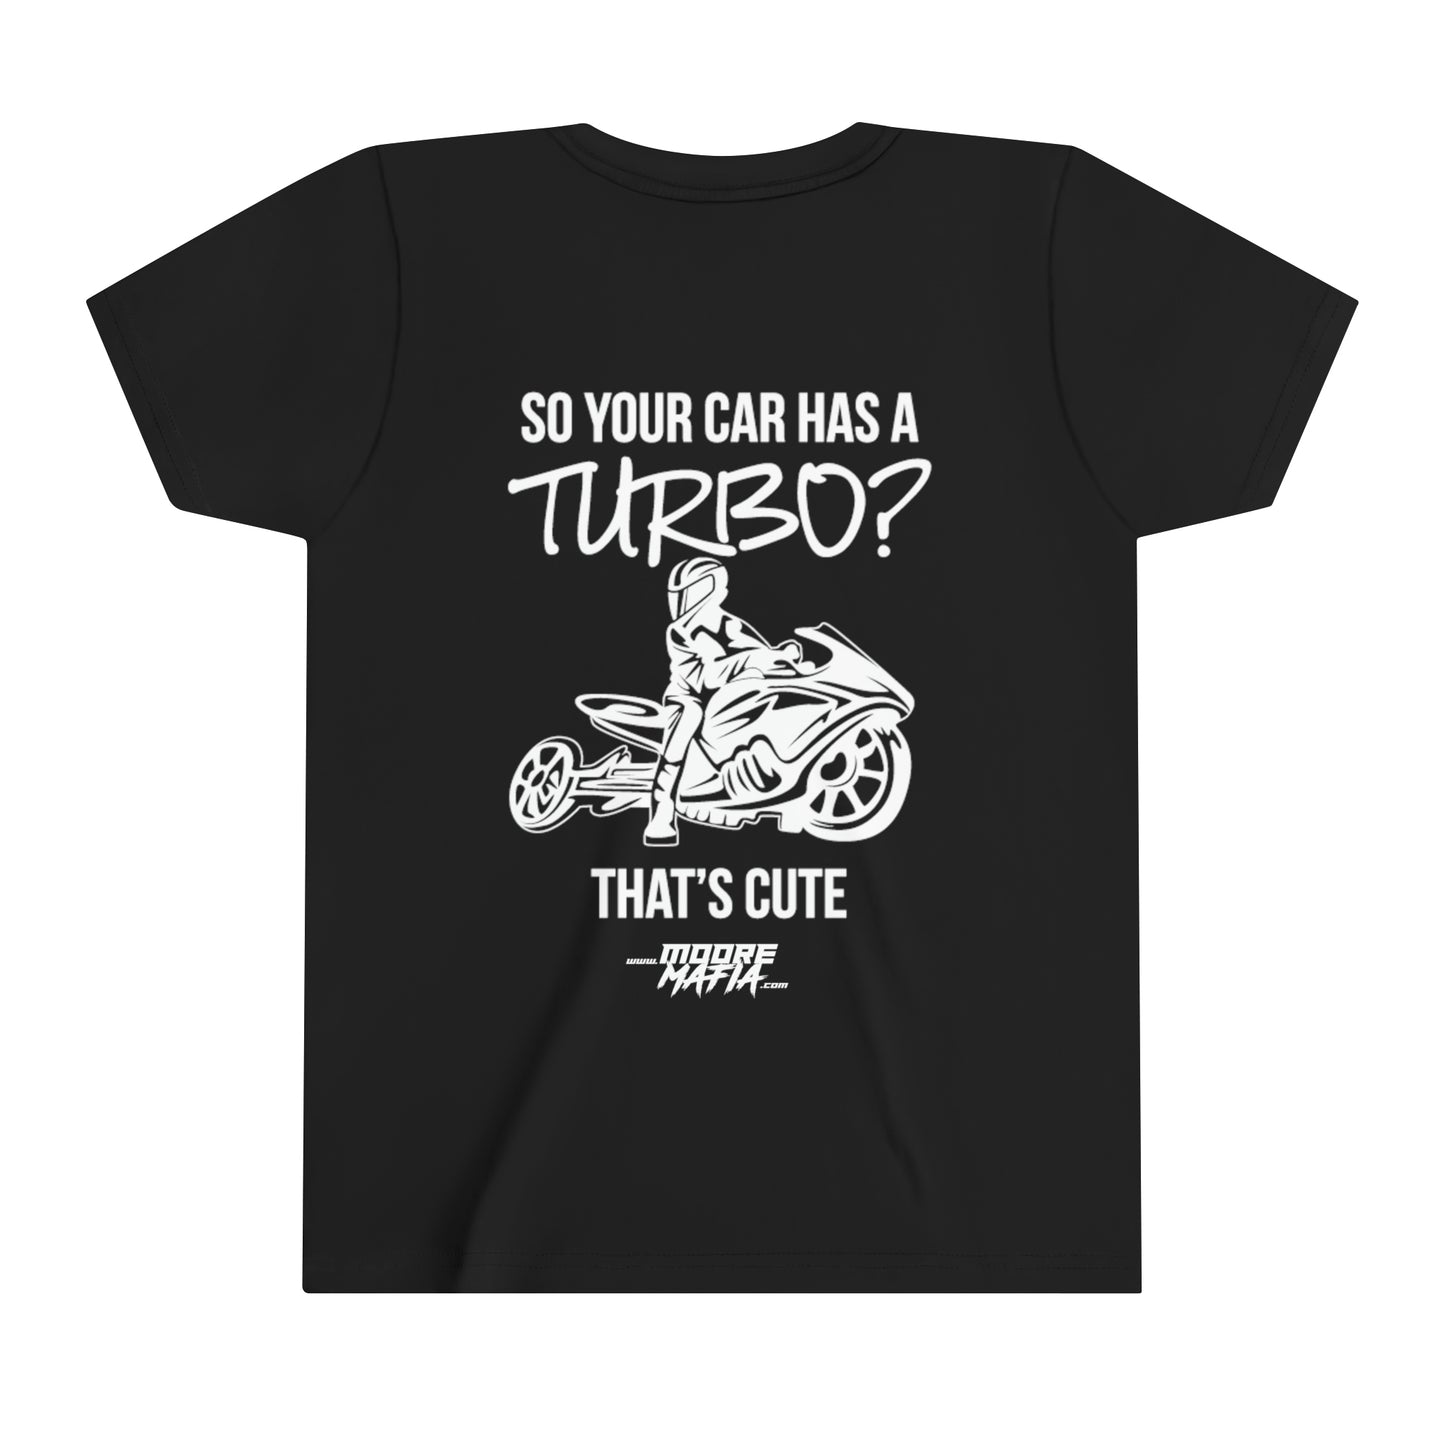 That's Cute Youth Short Sleeve T-Shirt